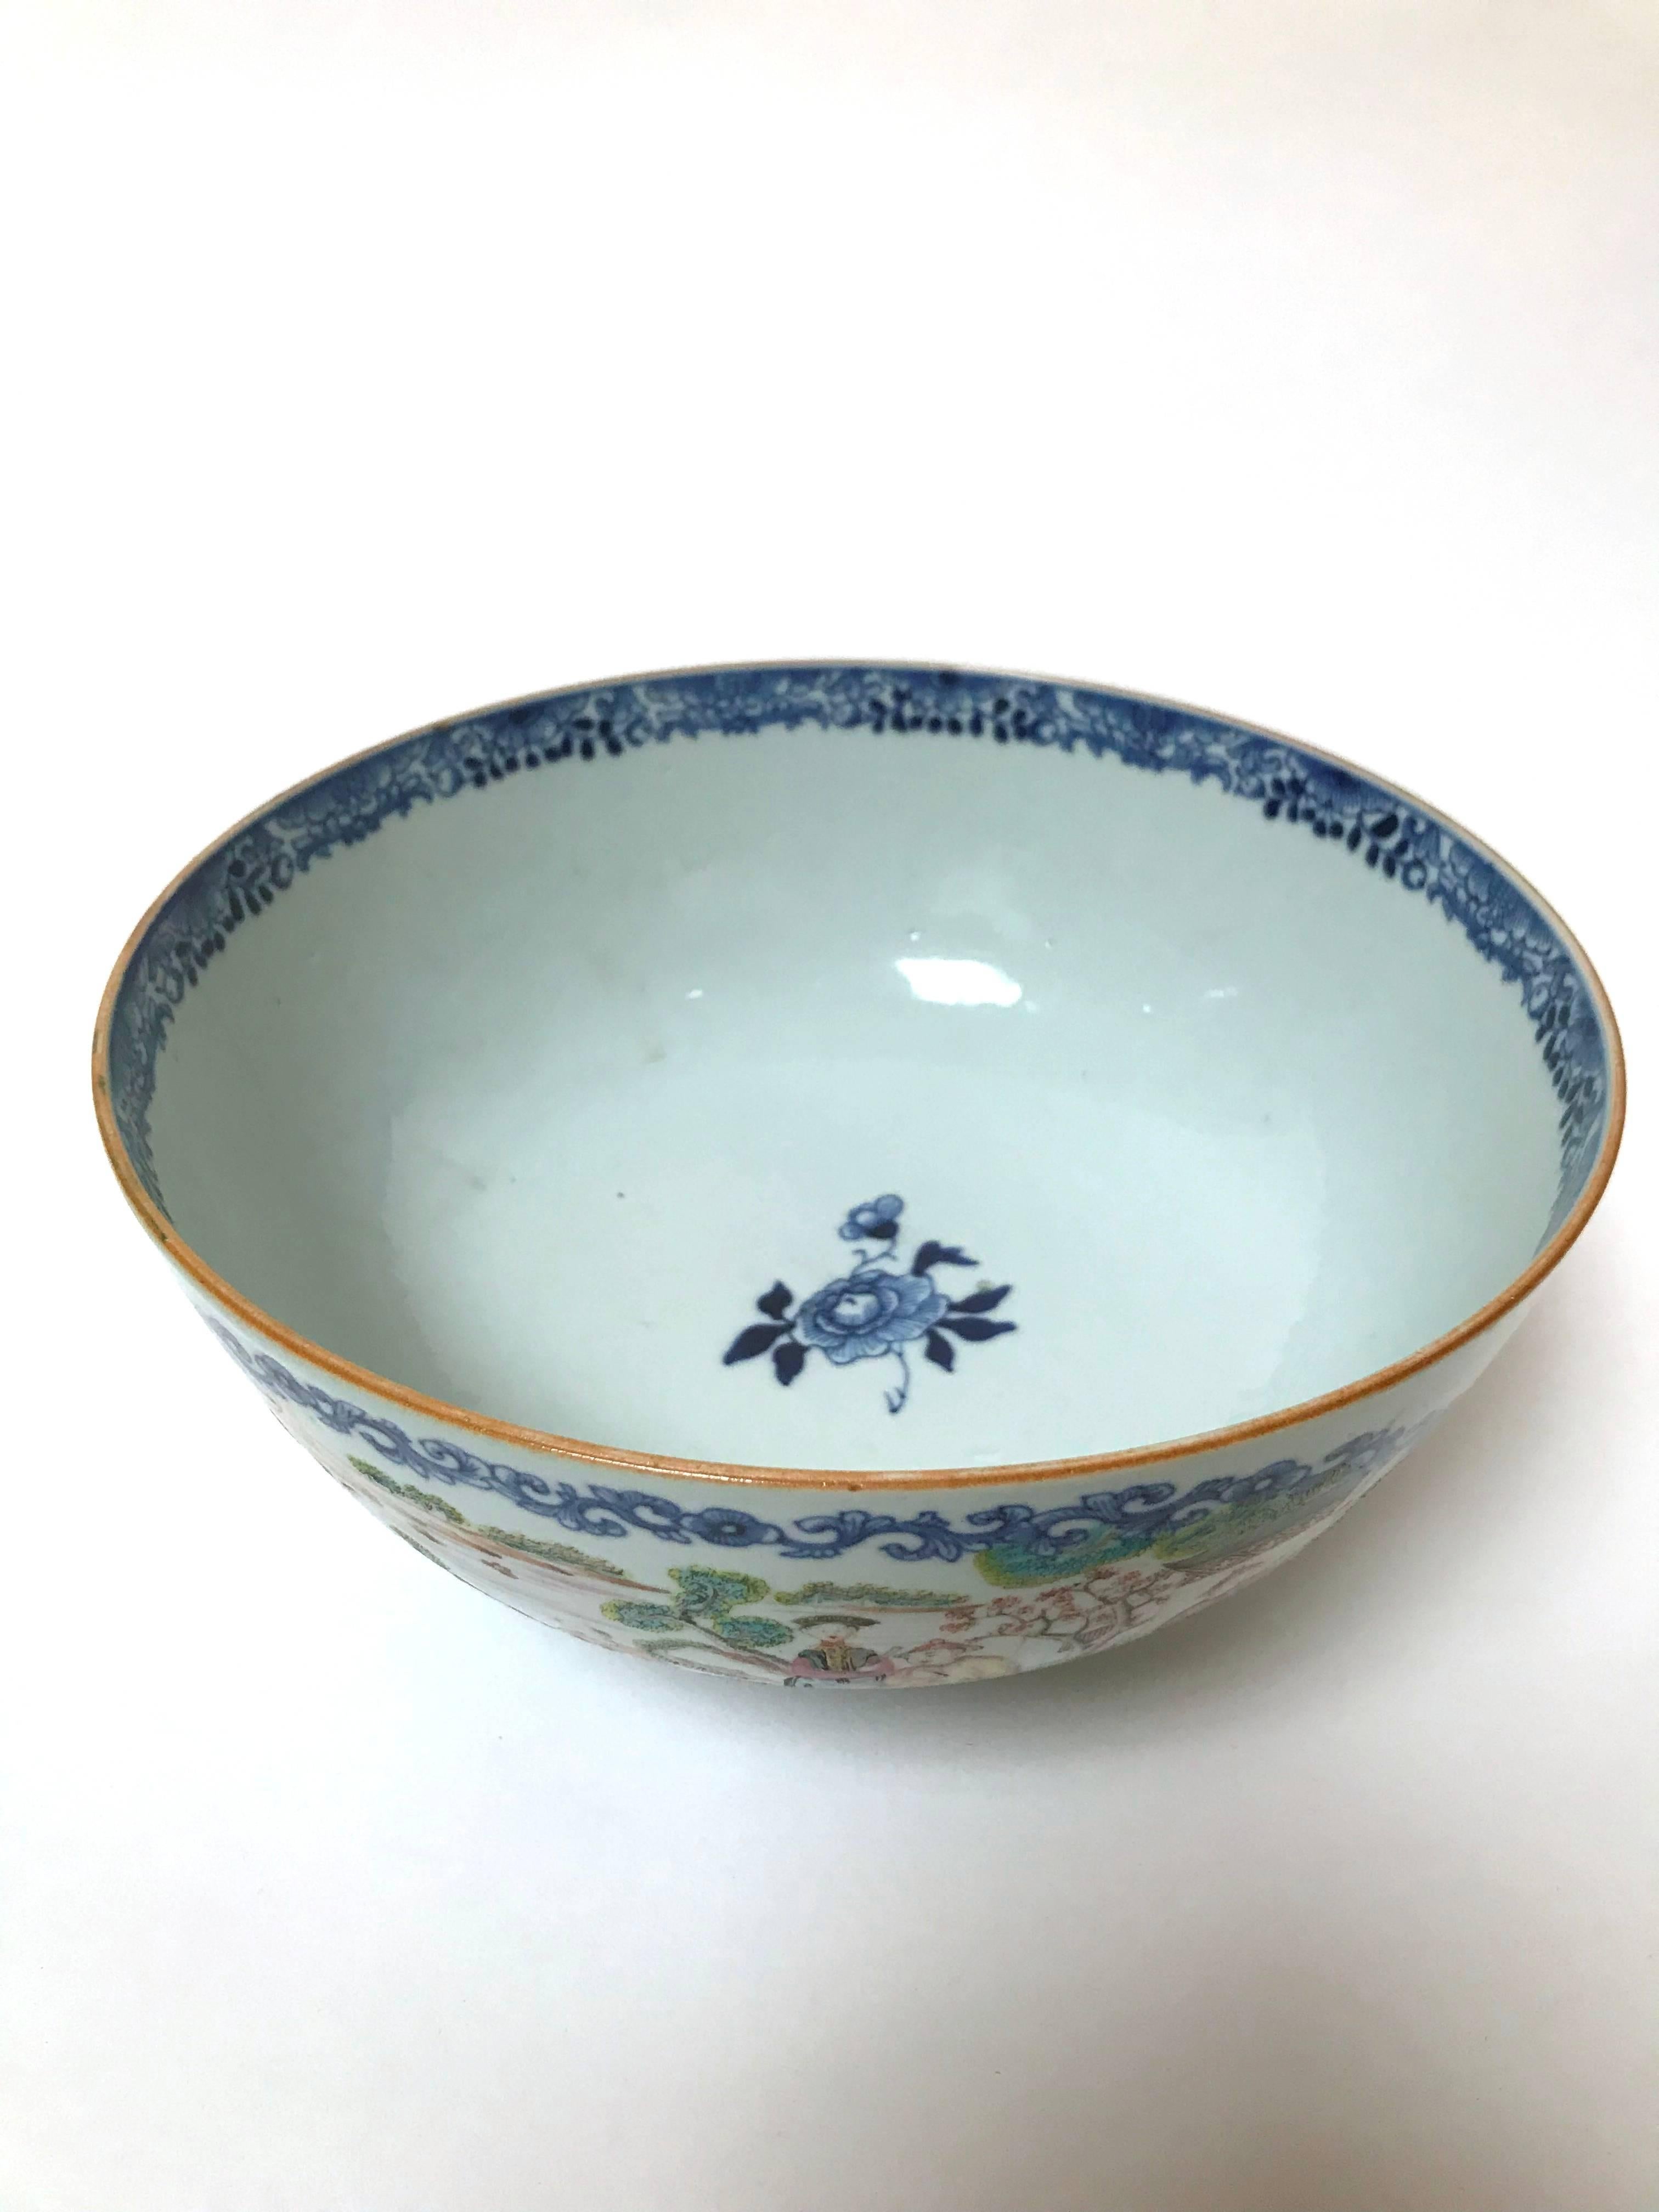 A large centrepiece Chinese Qianlong period export porcelain bowl, circa 1750-1760, painted in polychrome famille rose colors, the exterior with two large opposing panels framed in scrolling foliate forms in underglaze cobalt blue, each panel with a